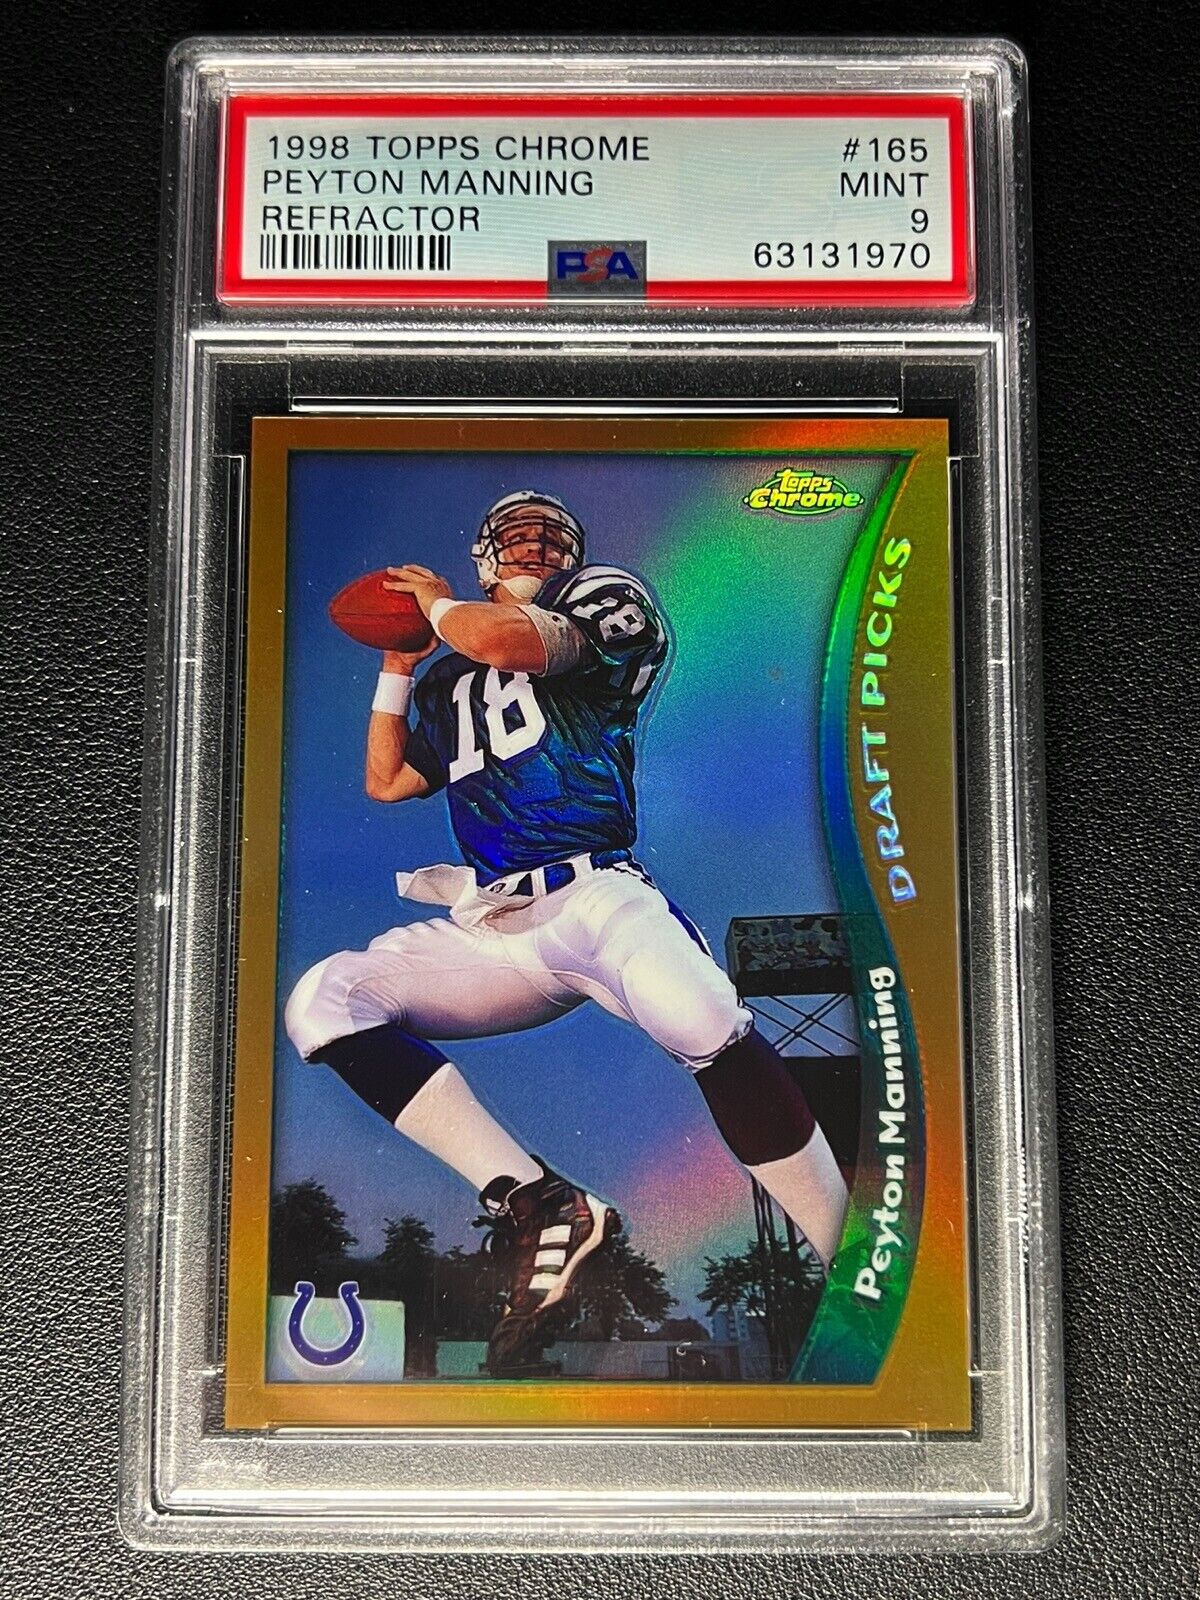 PEYTON MANNING PSA 9 1998 TOPPS CHROME FOOTBALL #165 REFRACTOR ROOKIE RC MINT